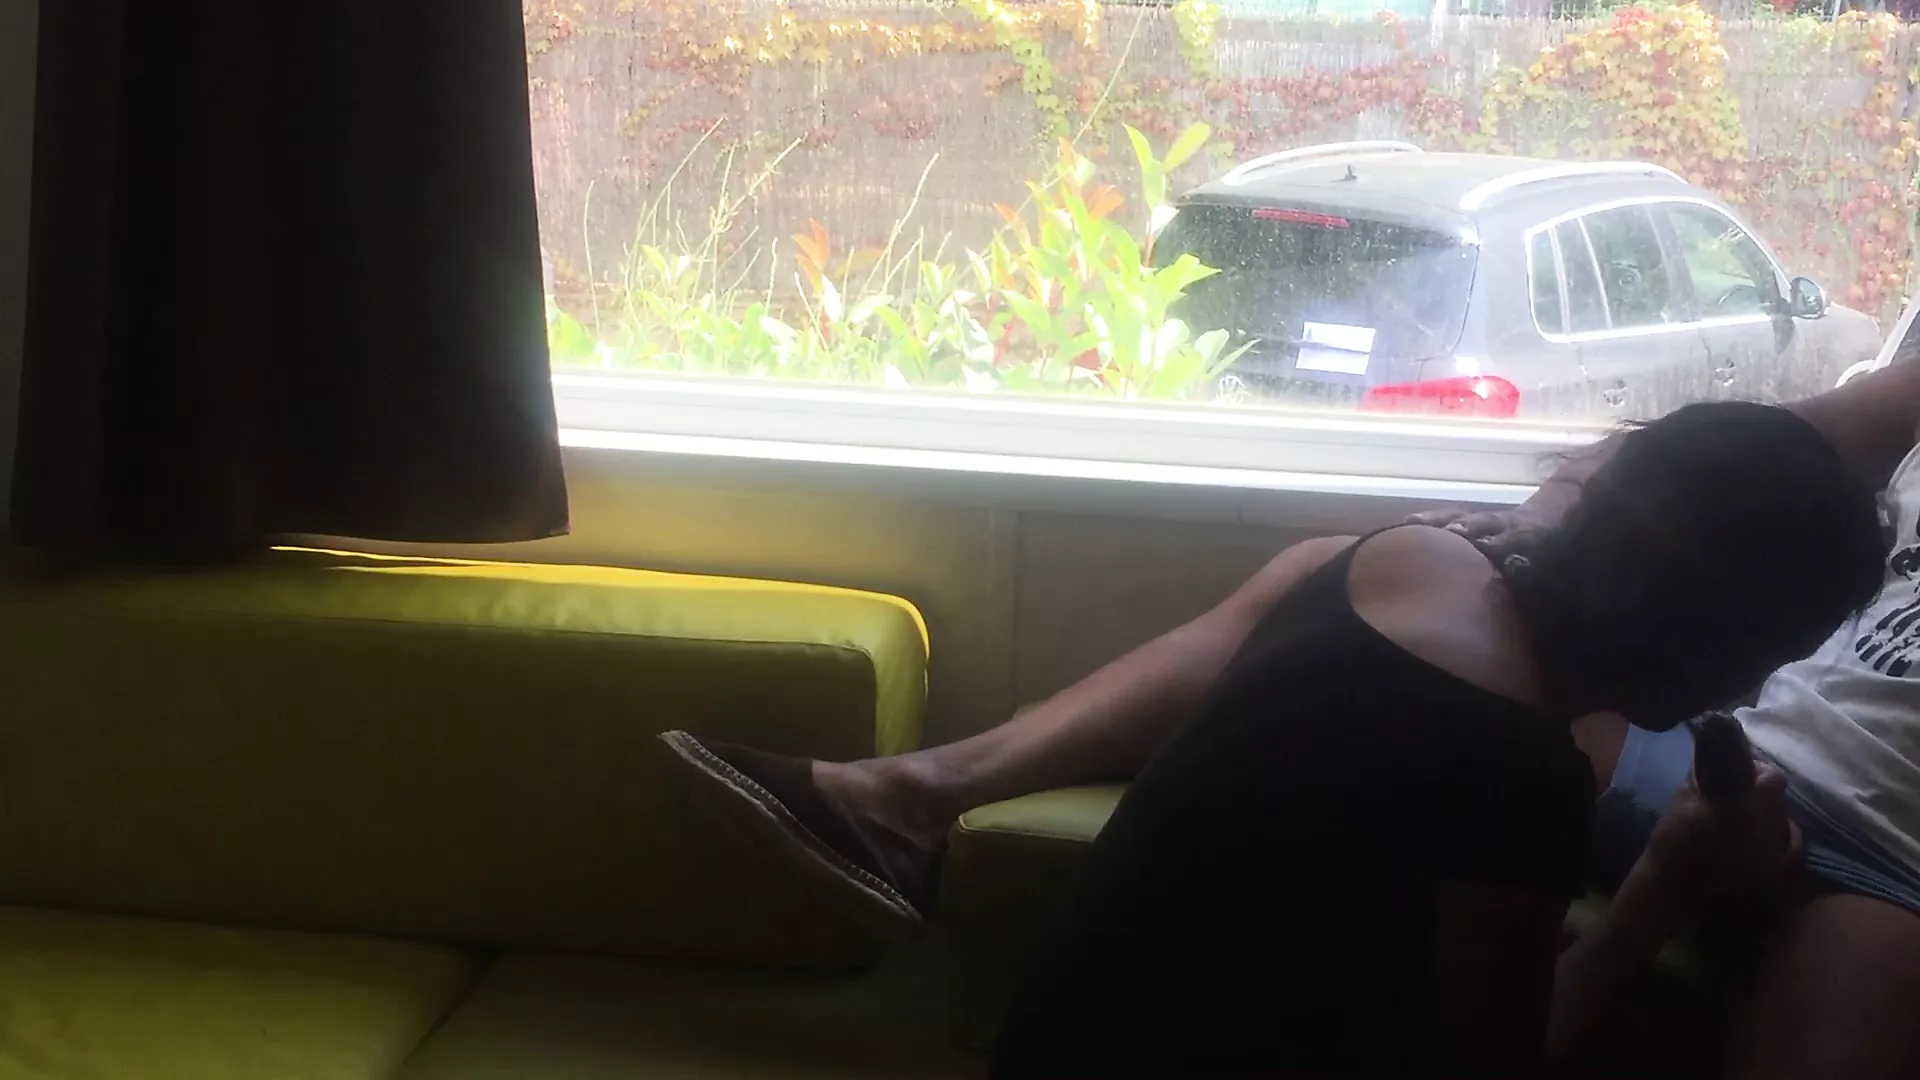 Wife giving risky blowjob in front of window in a camper